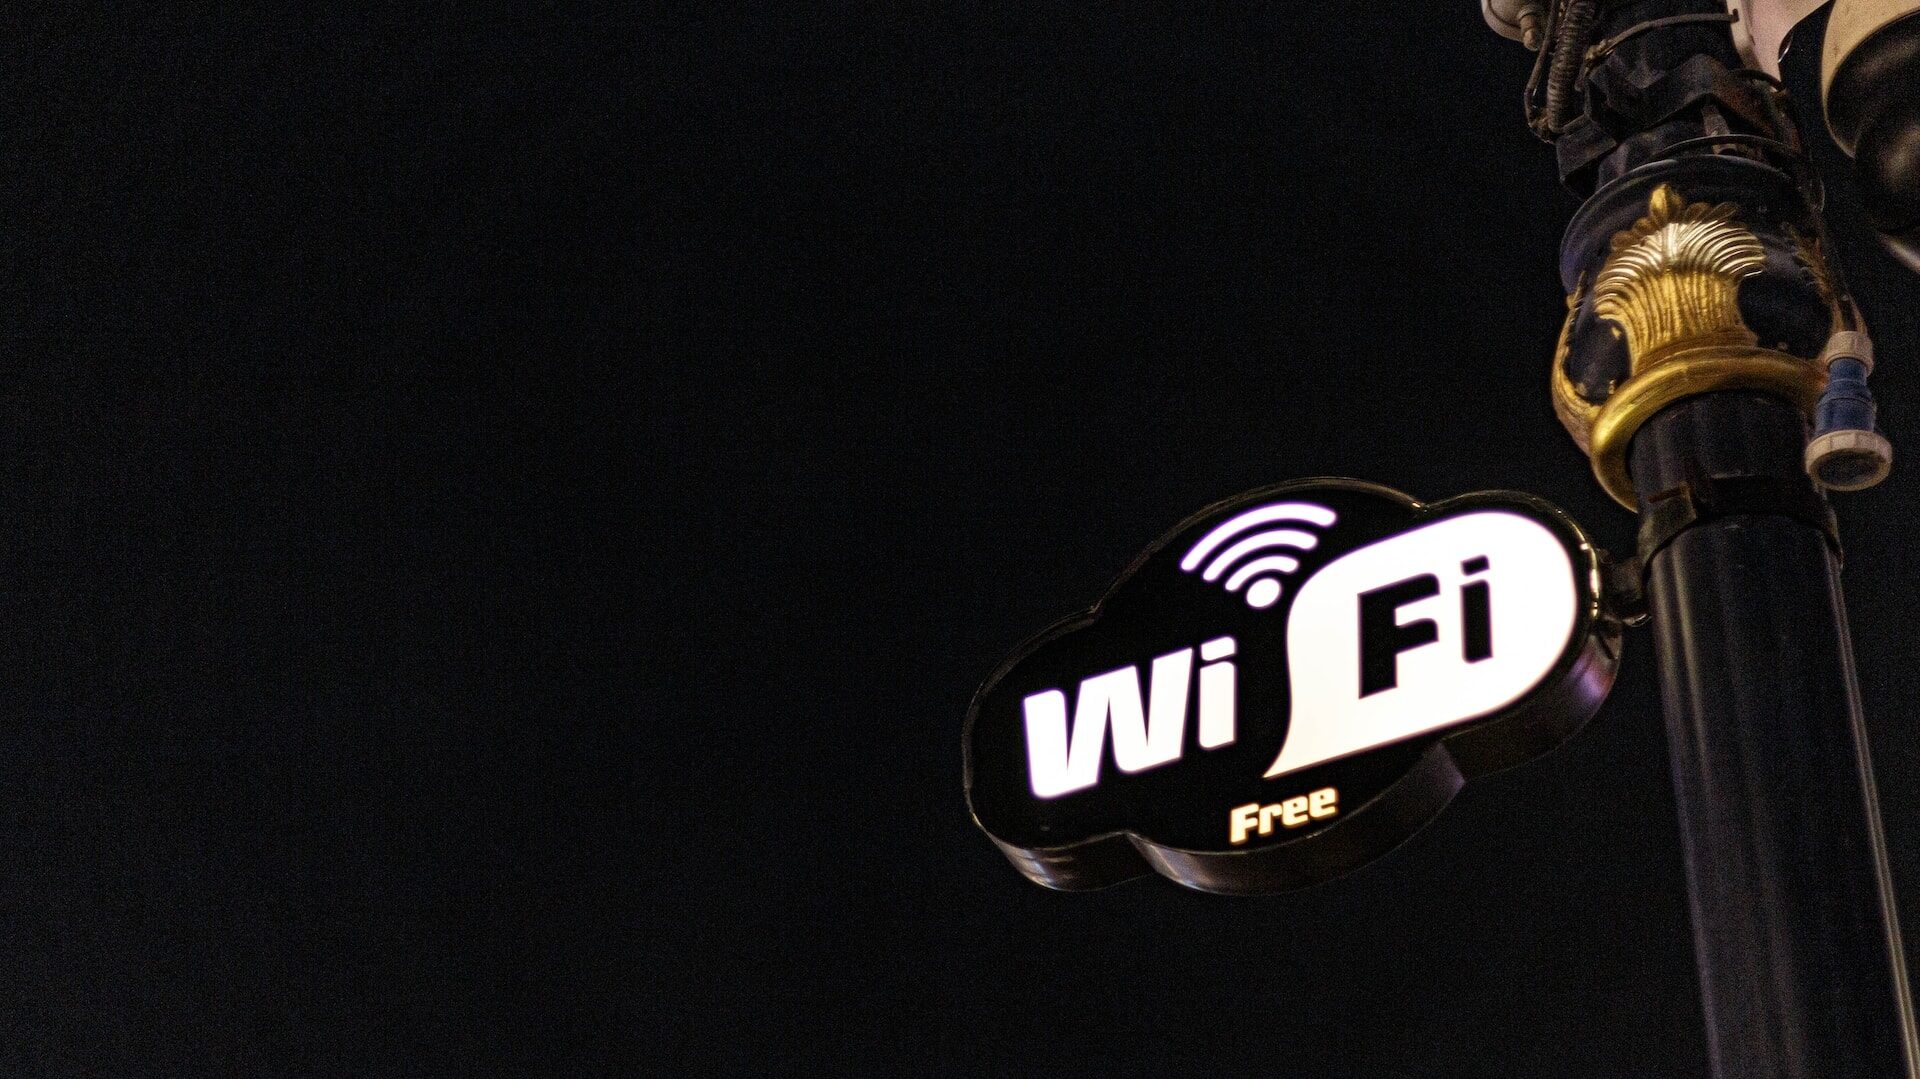 High-speed Wi-Fi - hotel technology trends